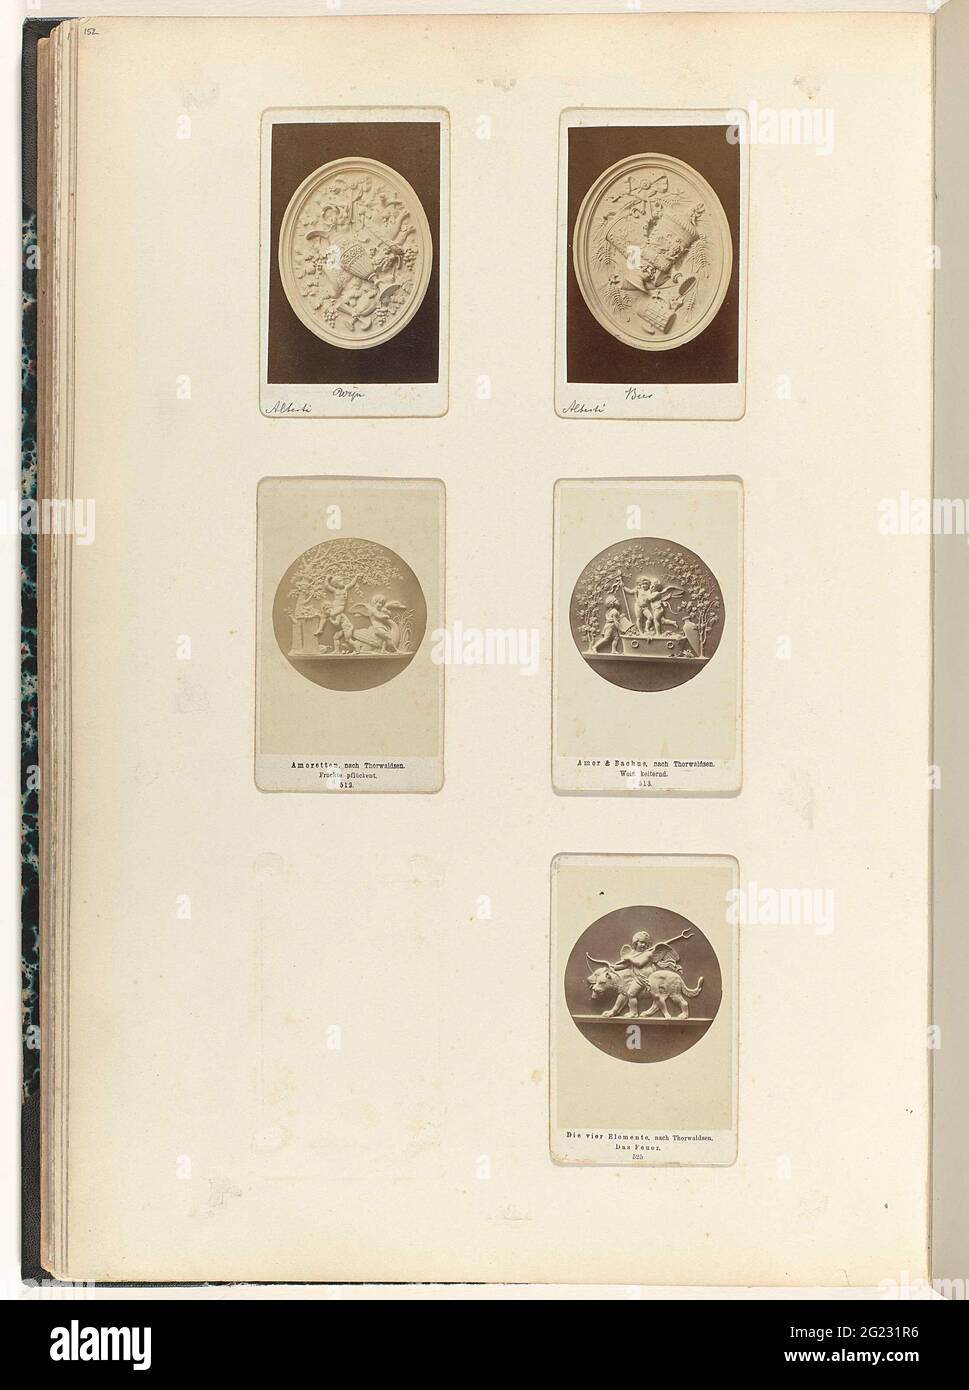 Five cartes-de-visite with two oval and three round ornaments; Amorets /  Amor & Bachus / Which four element. On the Cartes-de-Visite at the top are  two oval medallions with wine and beer